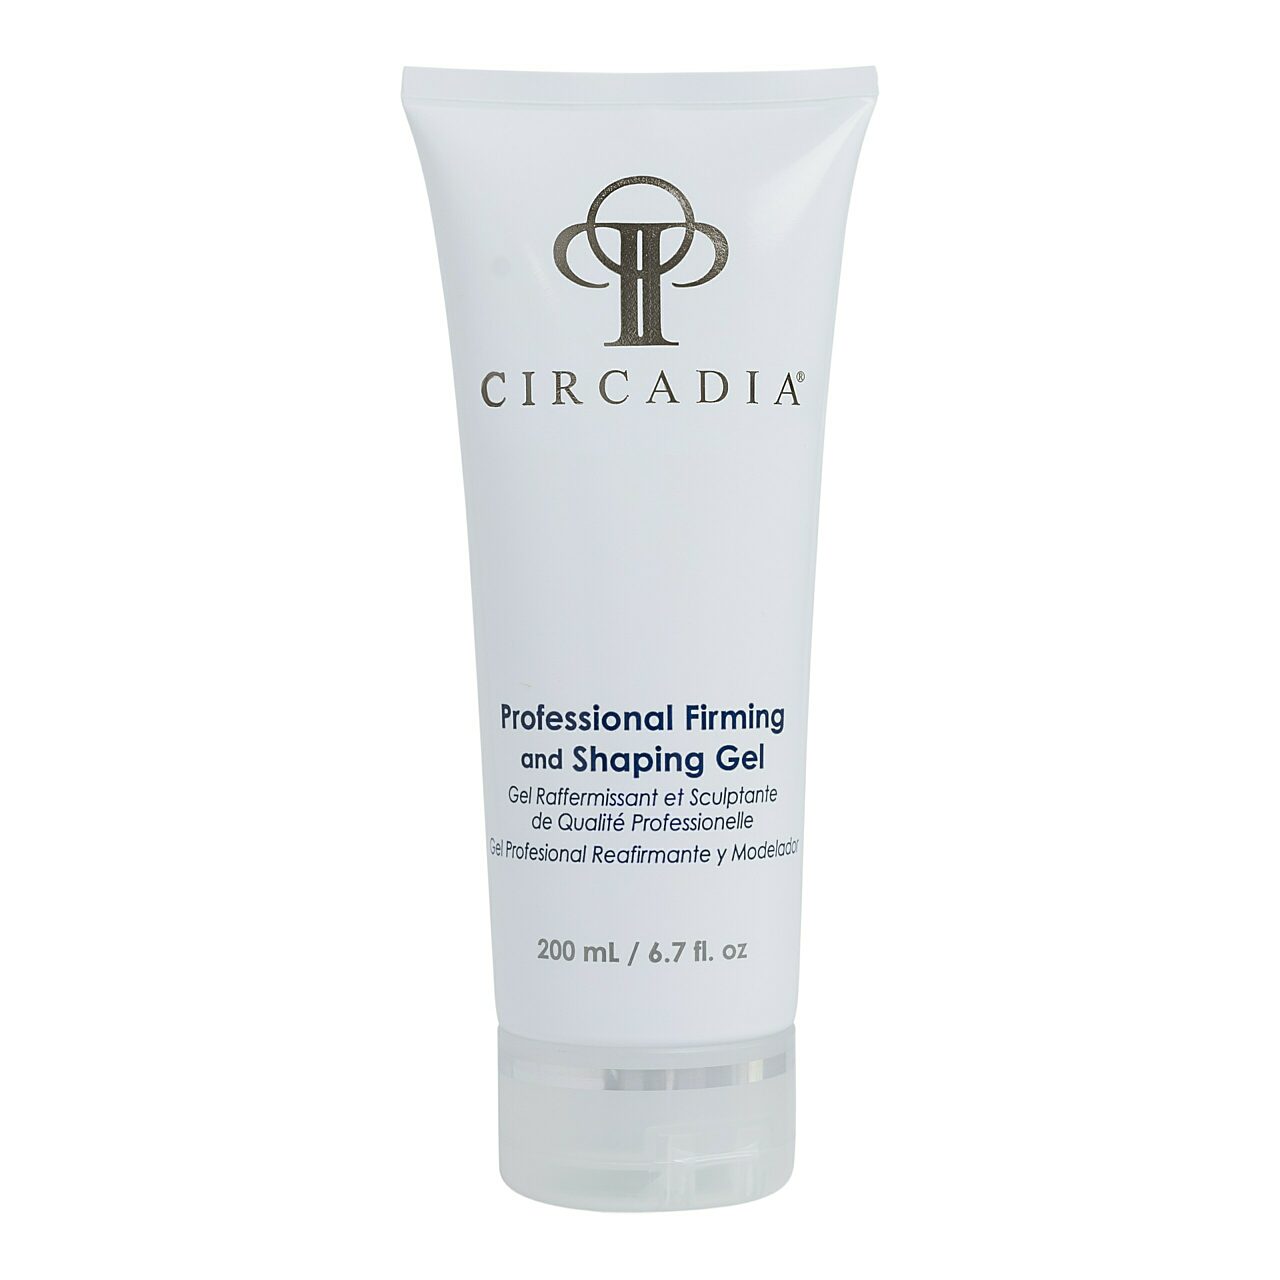 Circadia Professional Firming and Shaping Gel, 200 ml